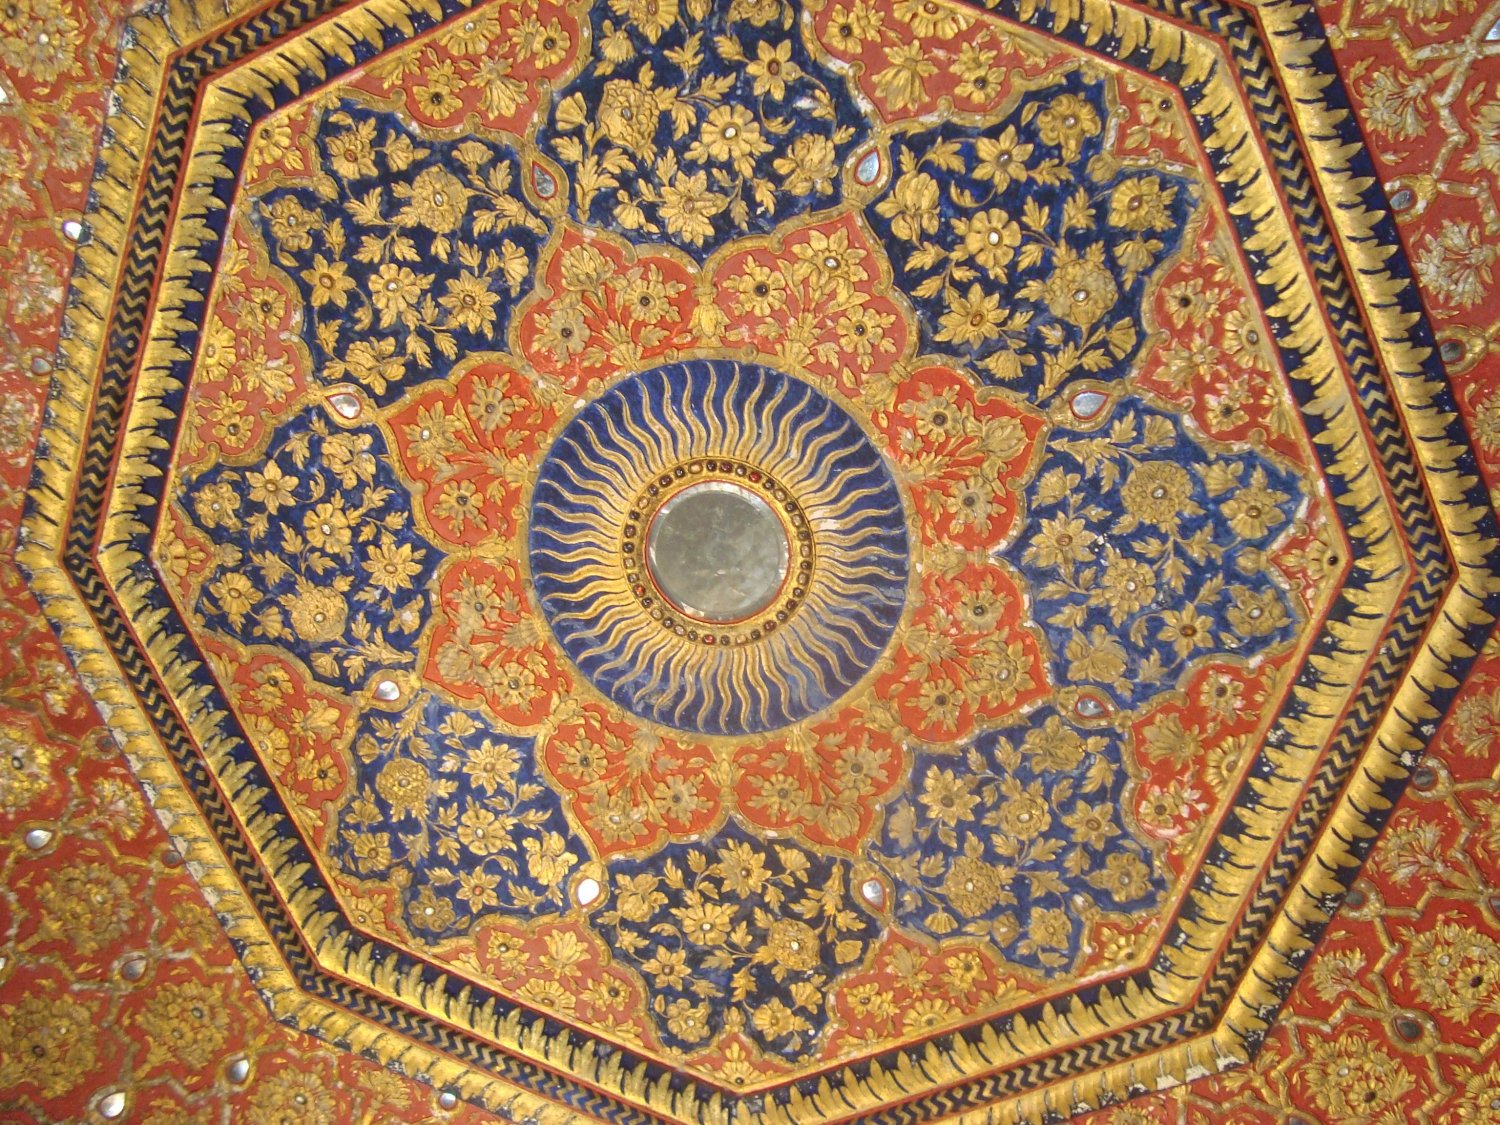 Ceiling_of_the_Golden_Temple_in_gold_and_precious_stones.JPG